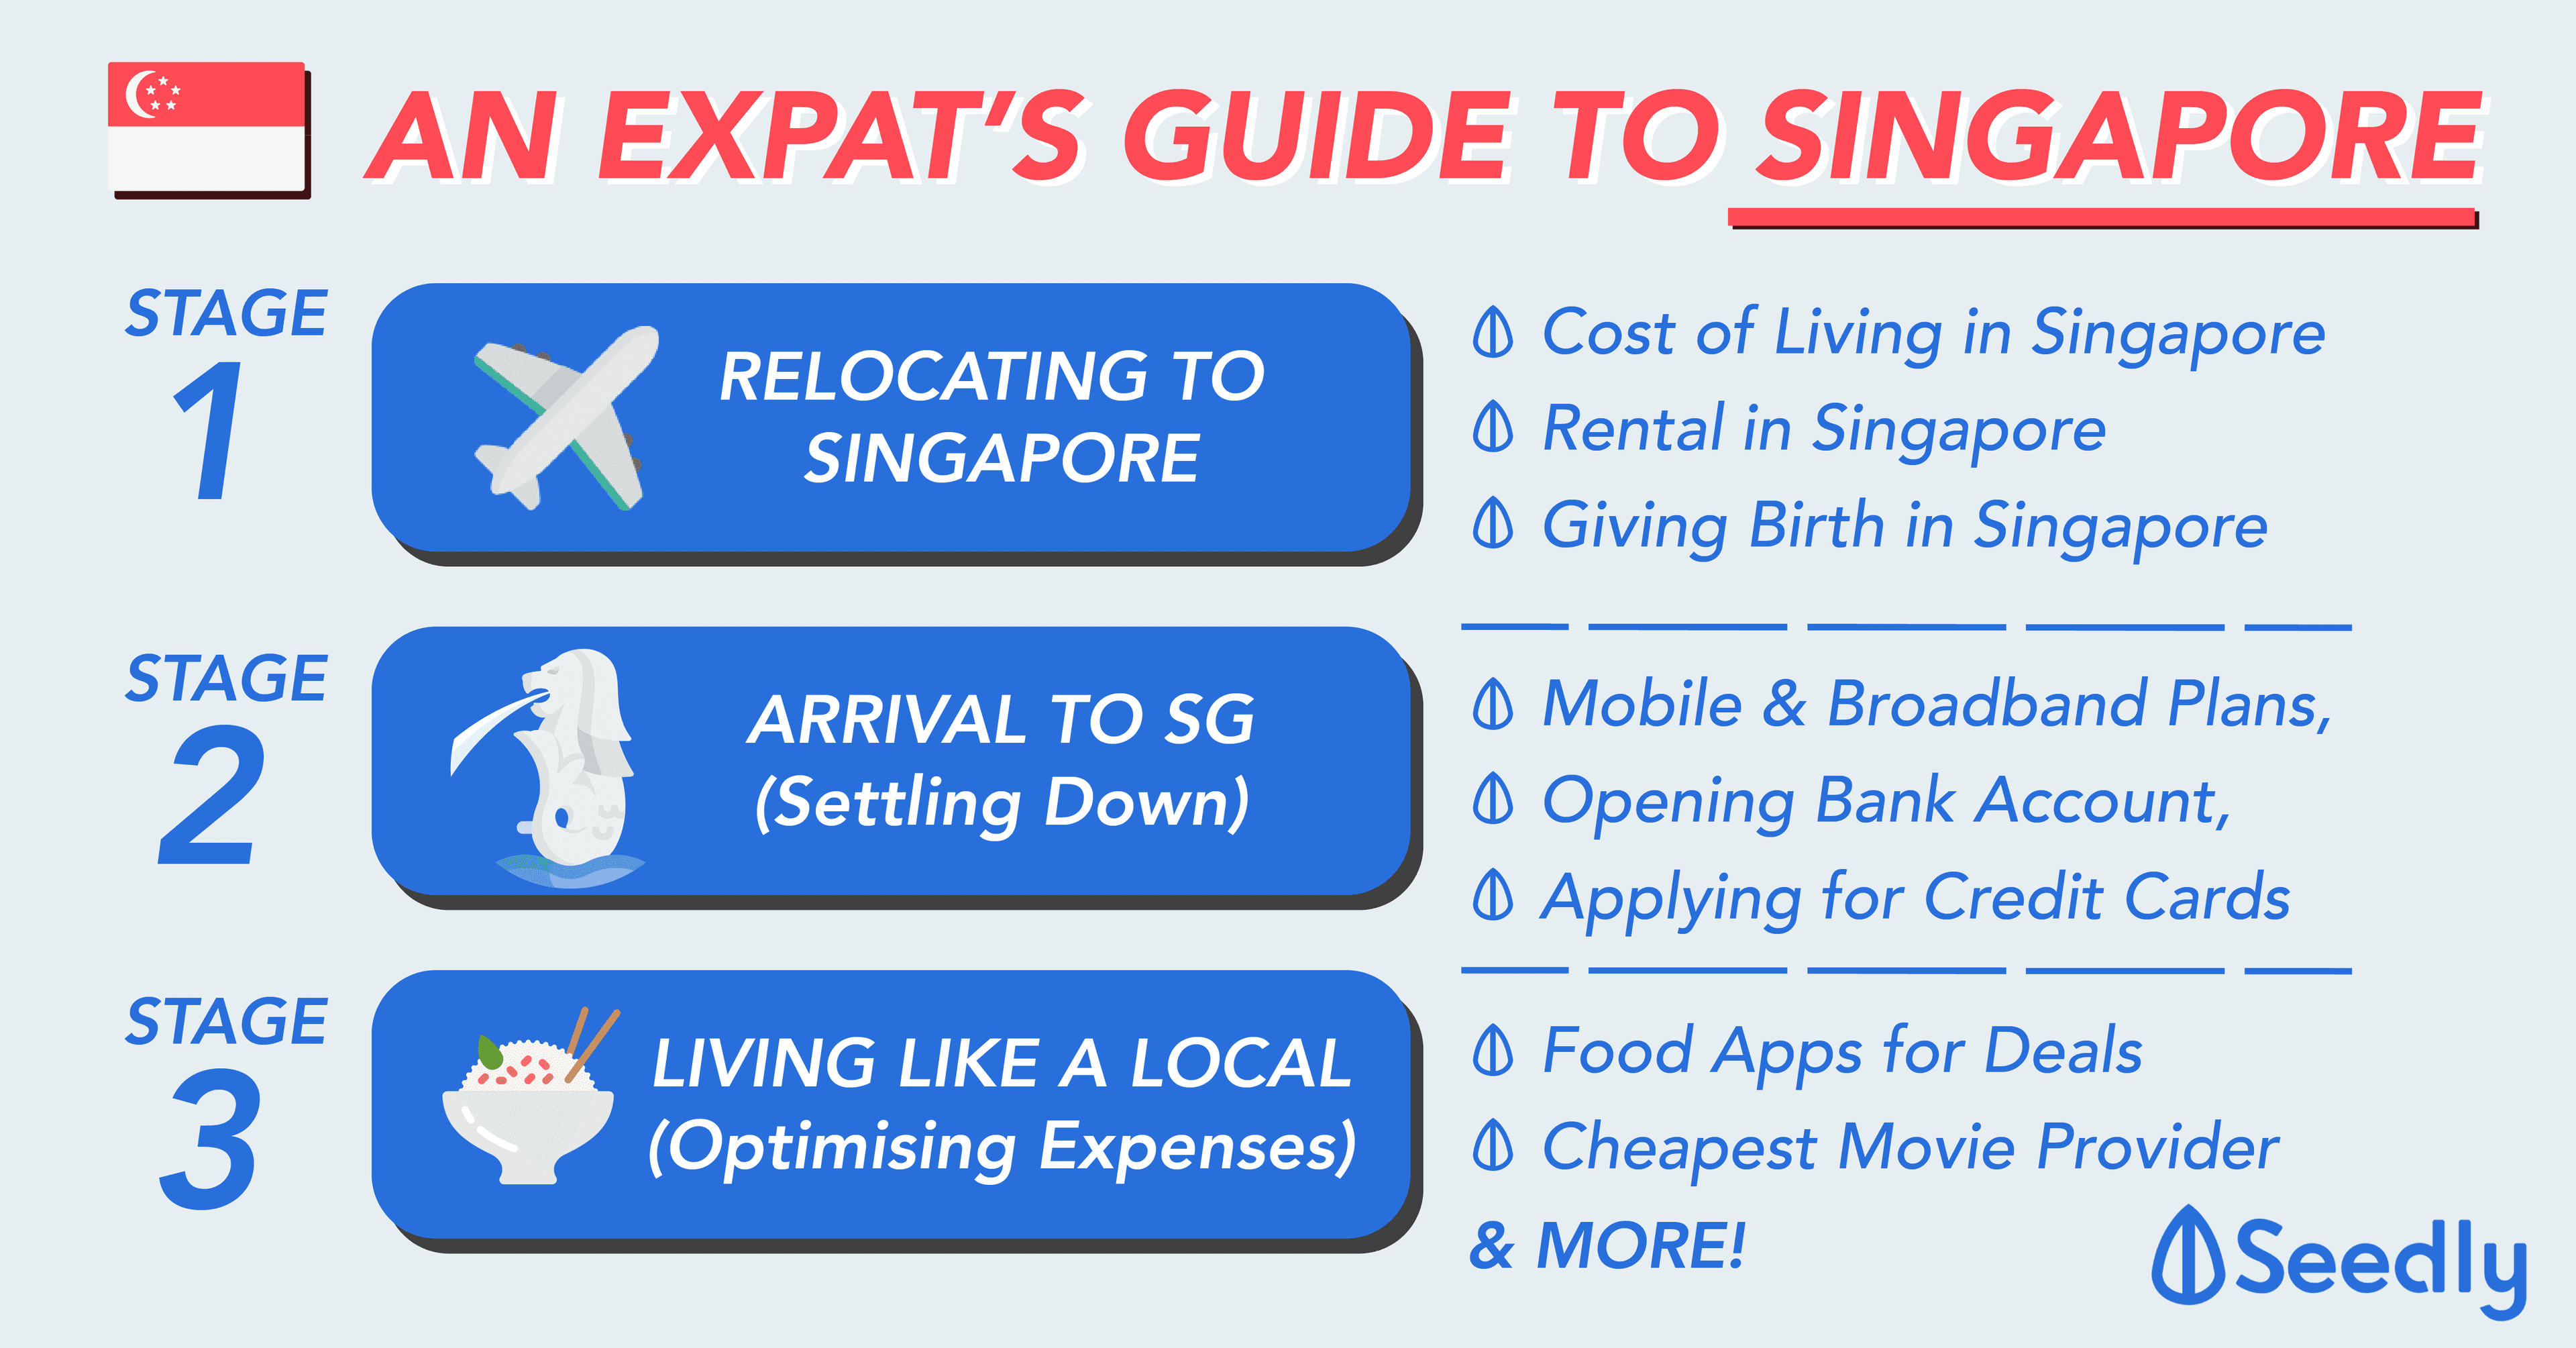 The Ultimate Go-To Guide for Expats Coming to Singapore